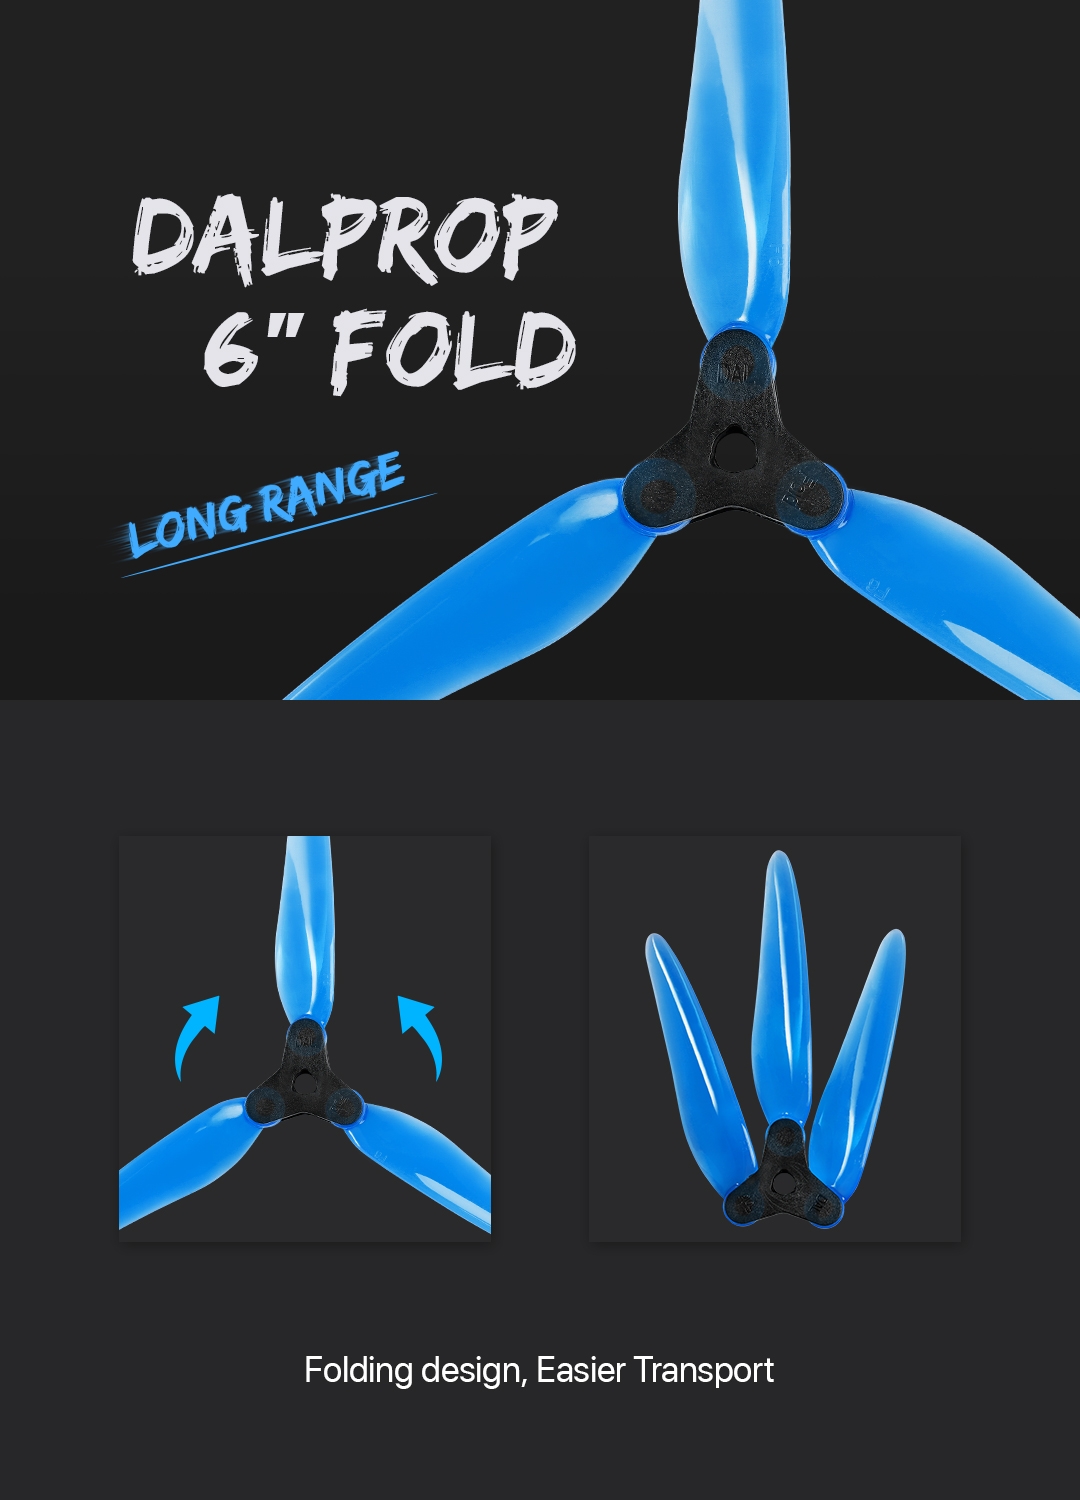 Dalprop Fold F6 6" Folding Propeller DIY Smooth Props Long Range Compatible POPO for FPV Racing RC Drone